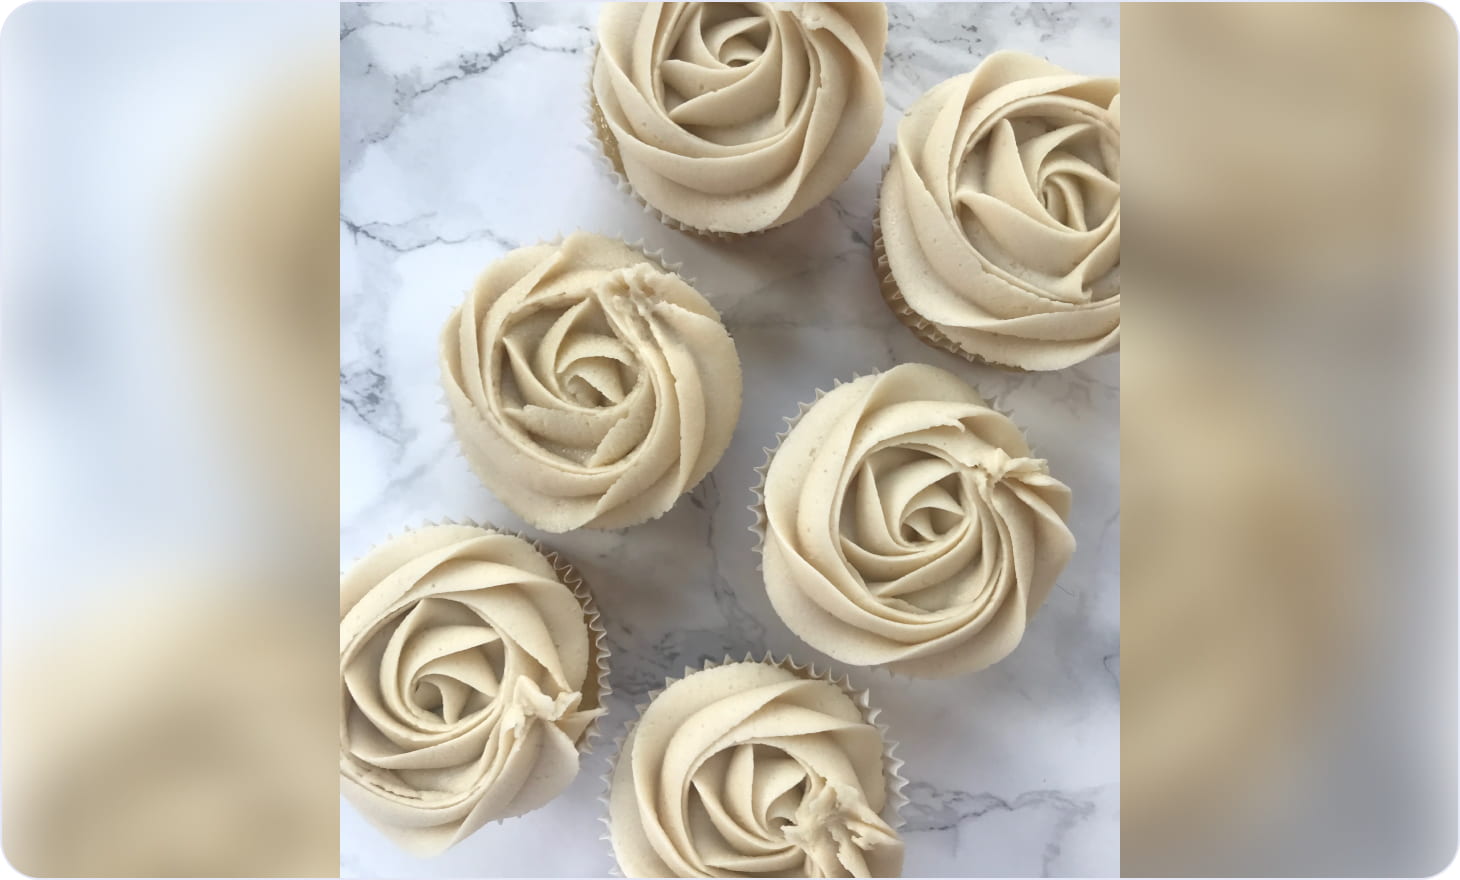 Gluten-free vanilla cupcakes in the shape of roses